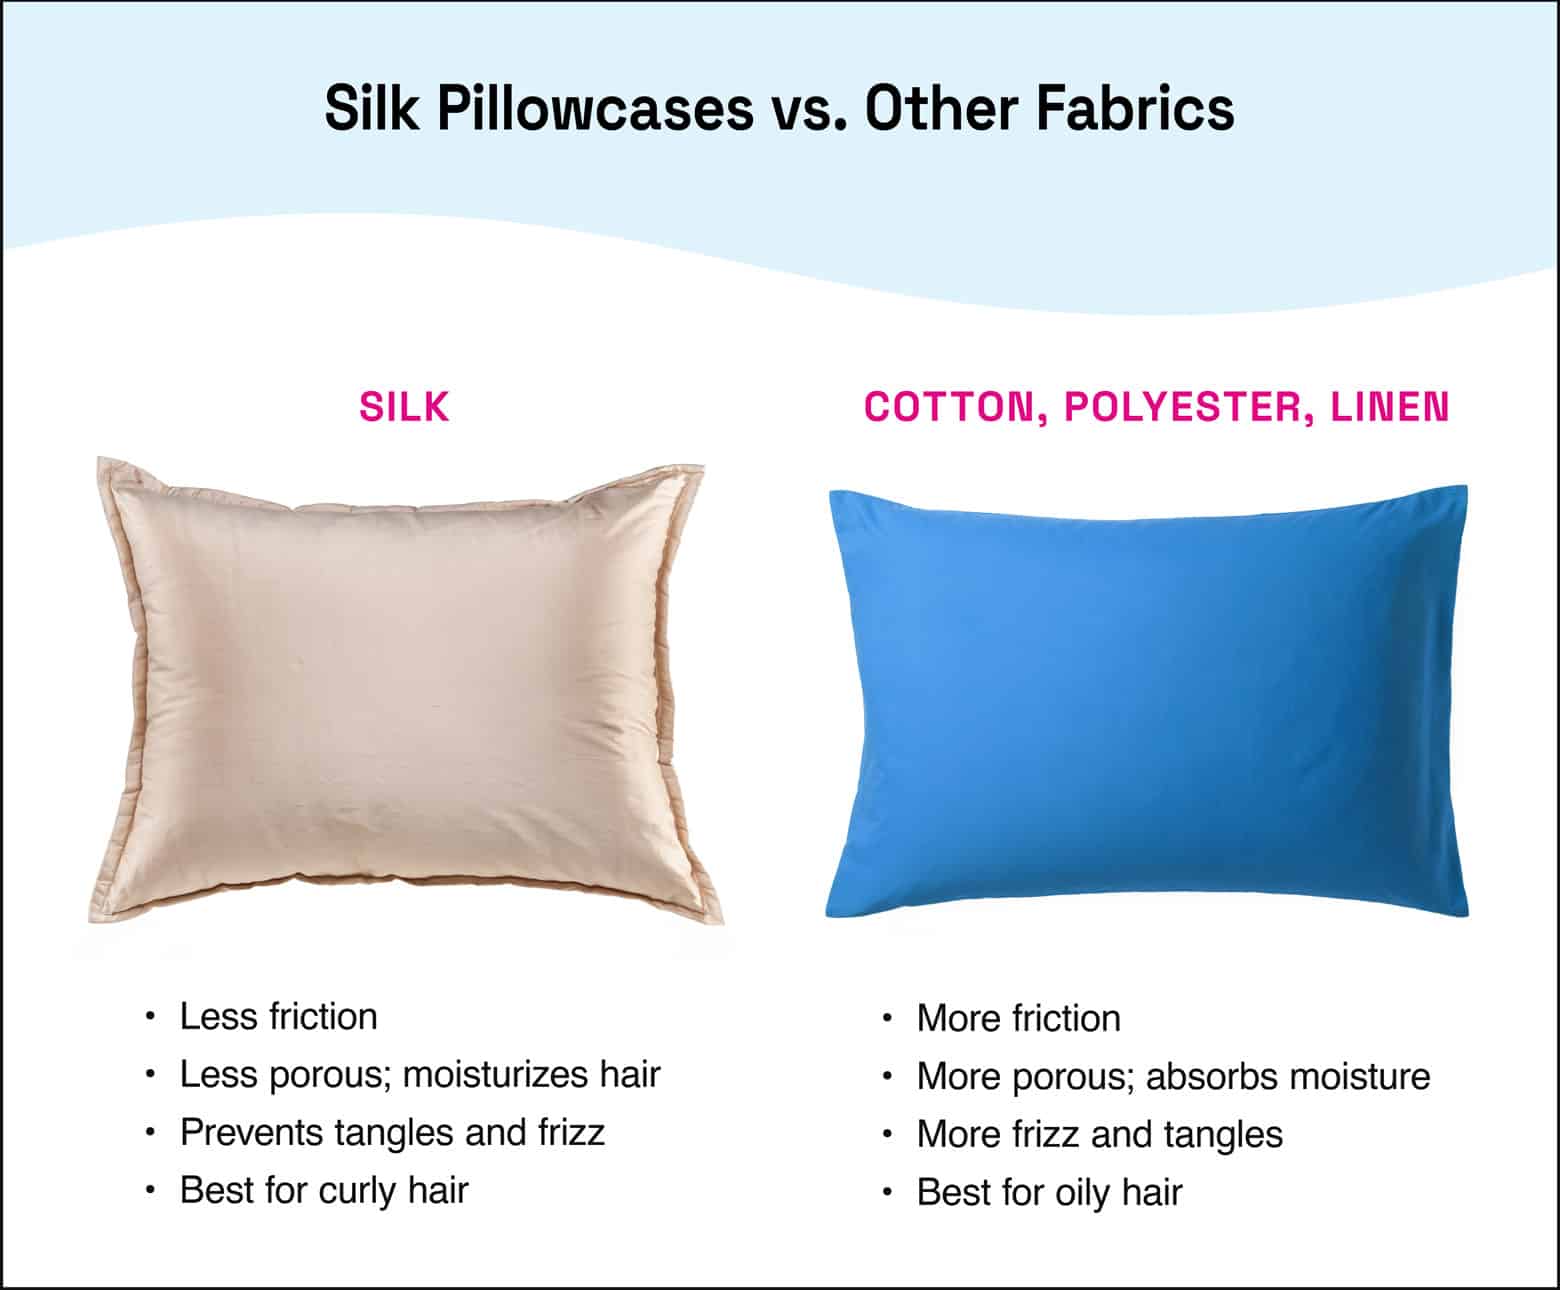 comparing silk pillowcases with other fabrics